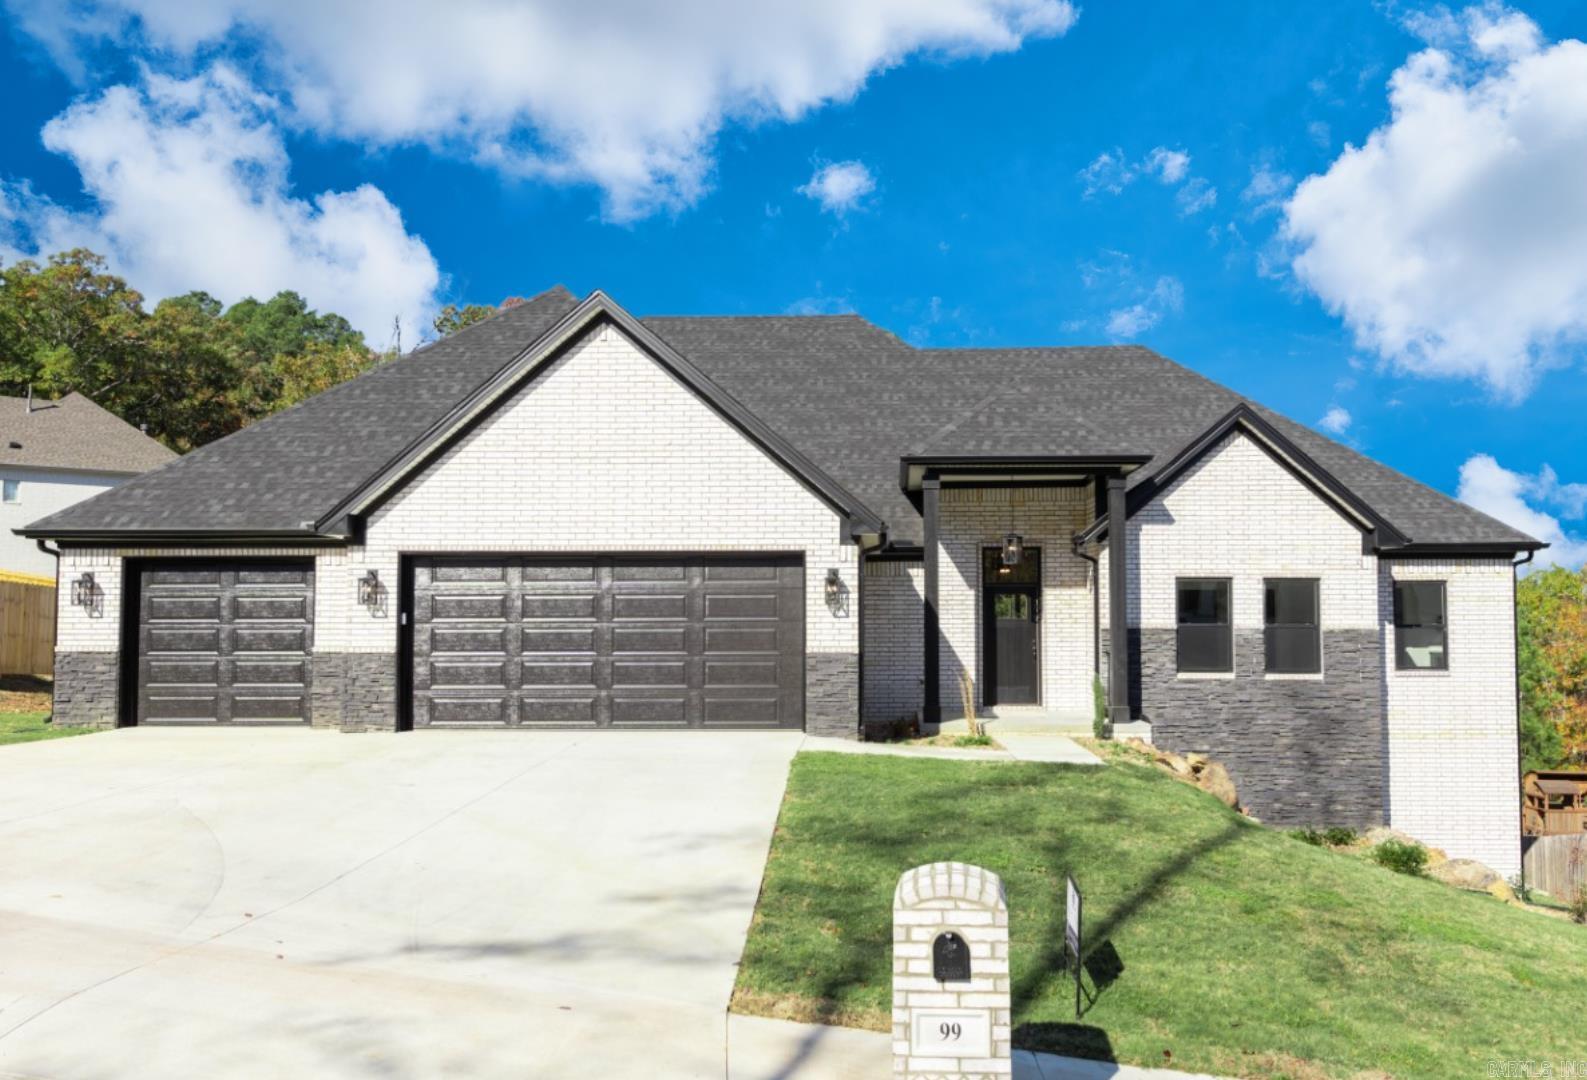 99 Delaware Drive, Maumelle, AR 72113